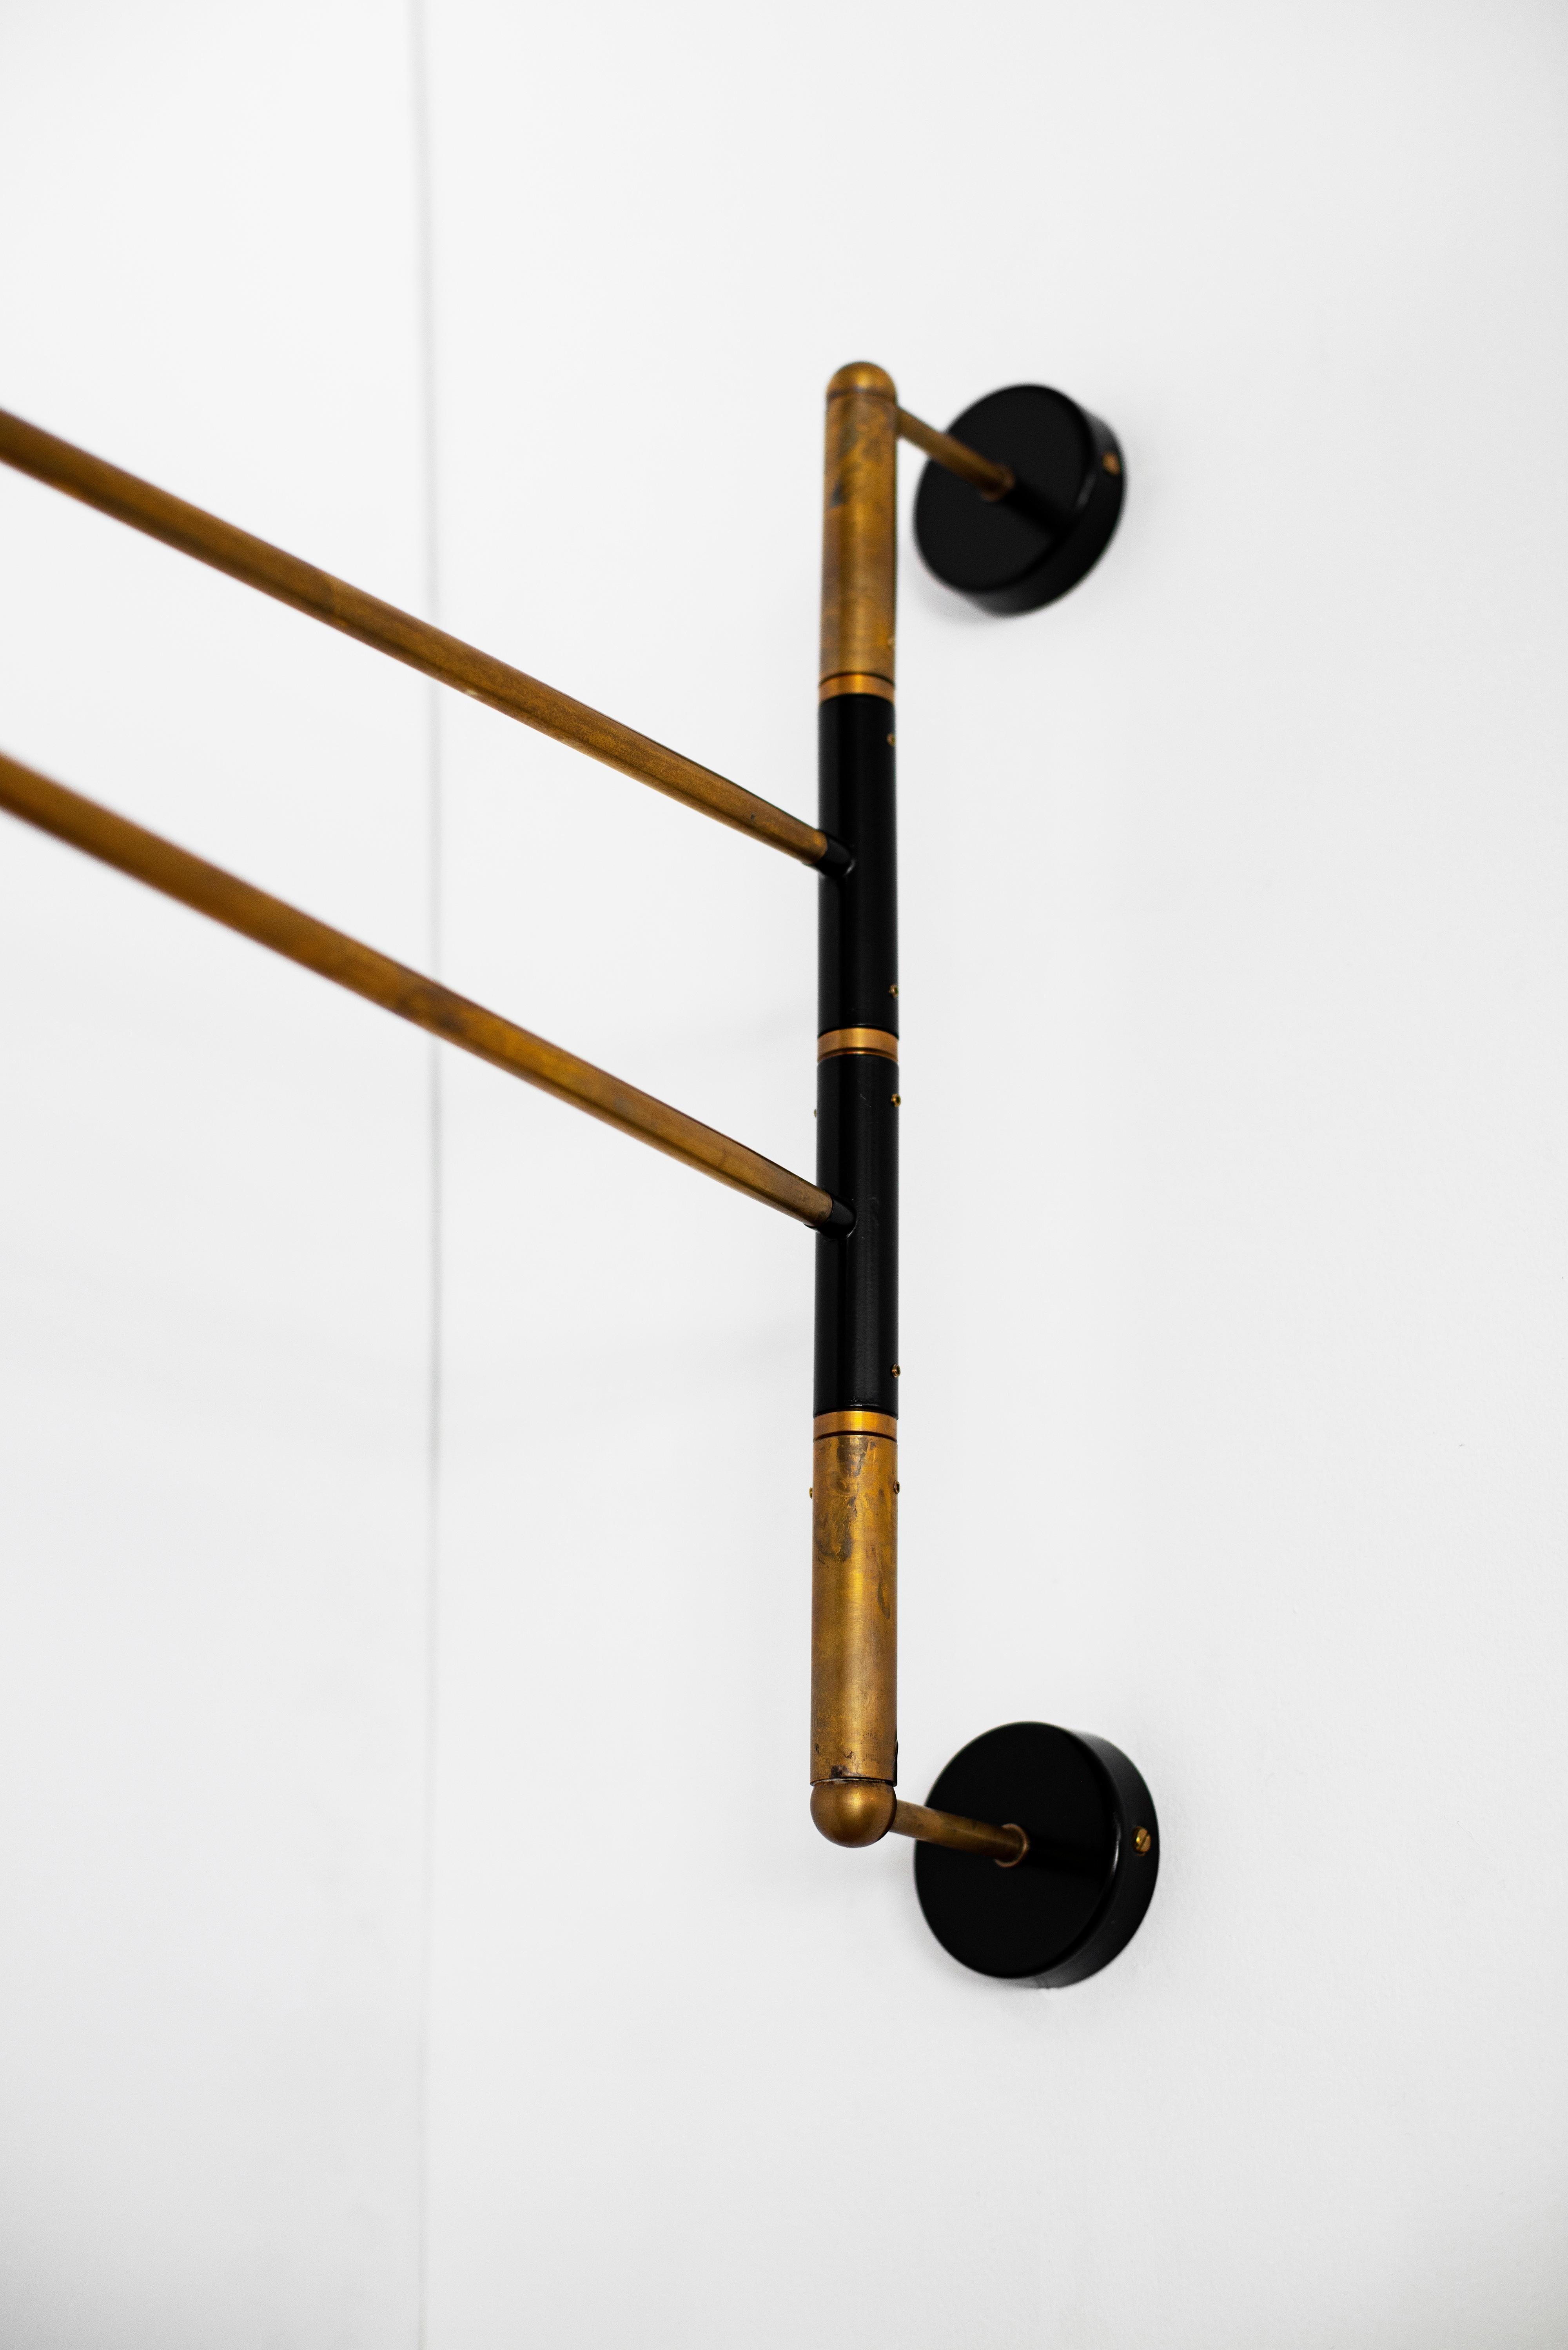 Great Italian articulating wall sconce with two swinging brass arms, each different lengths with unique black metal shades. Newly produced in Italy, wired to American standards.